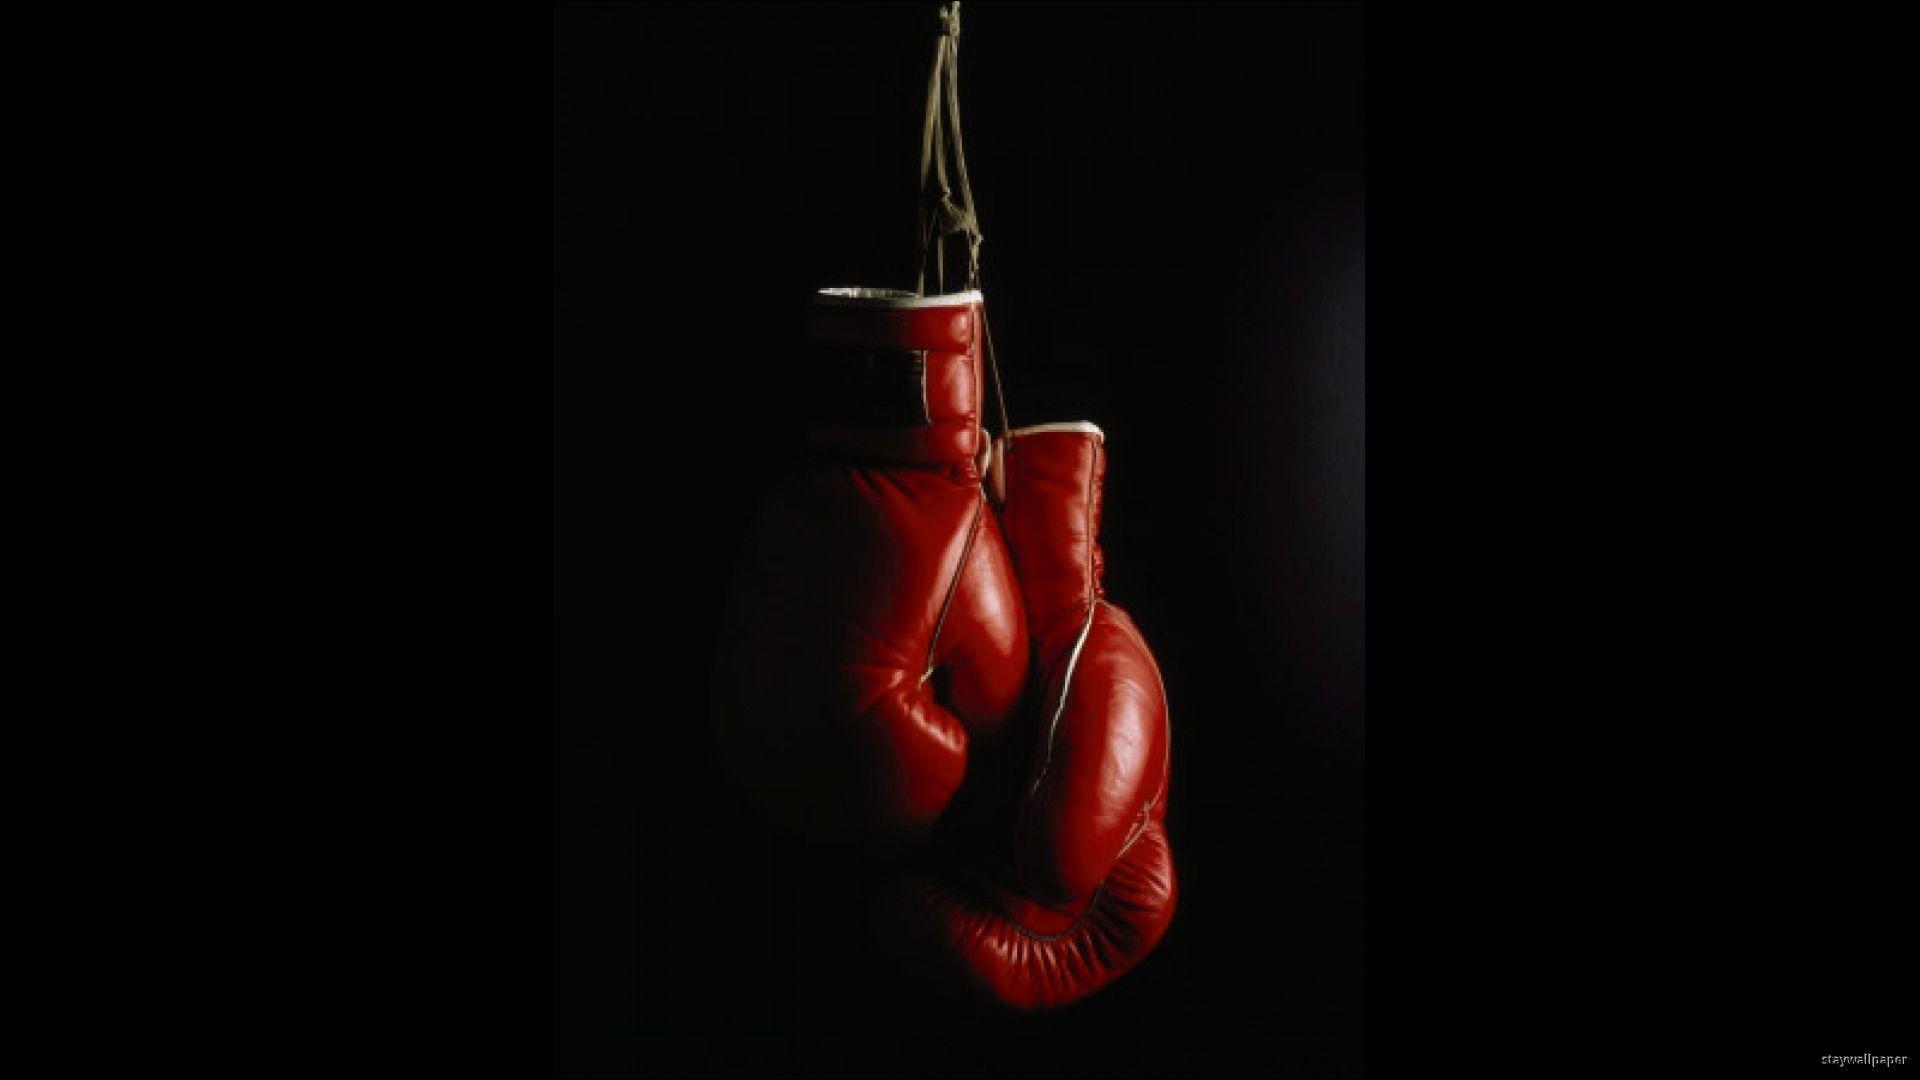 Black and Red Boxing Gloves 4K wallpaper download